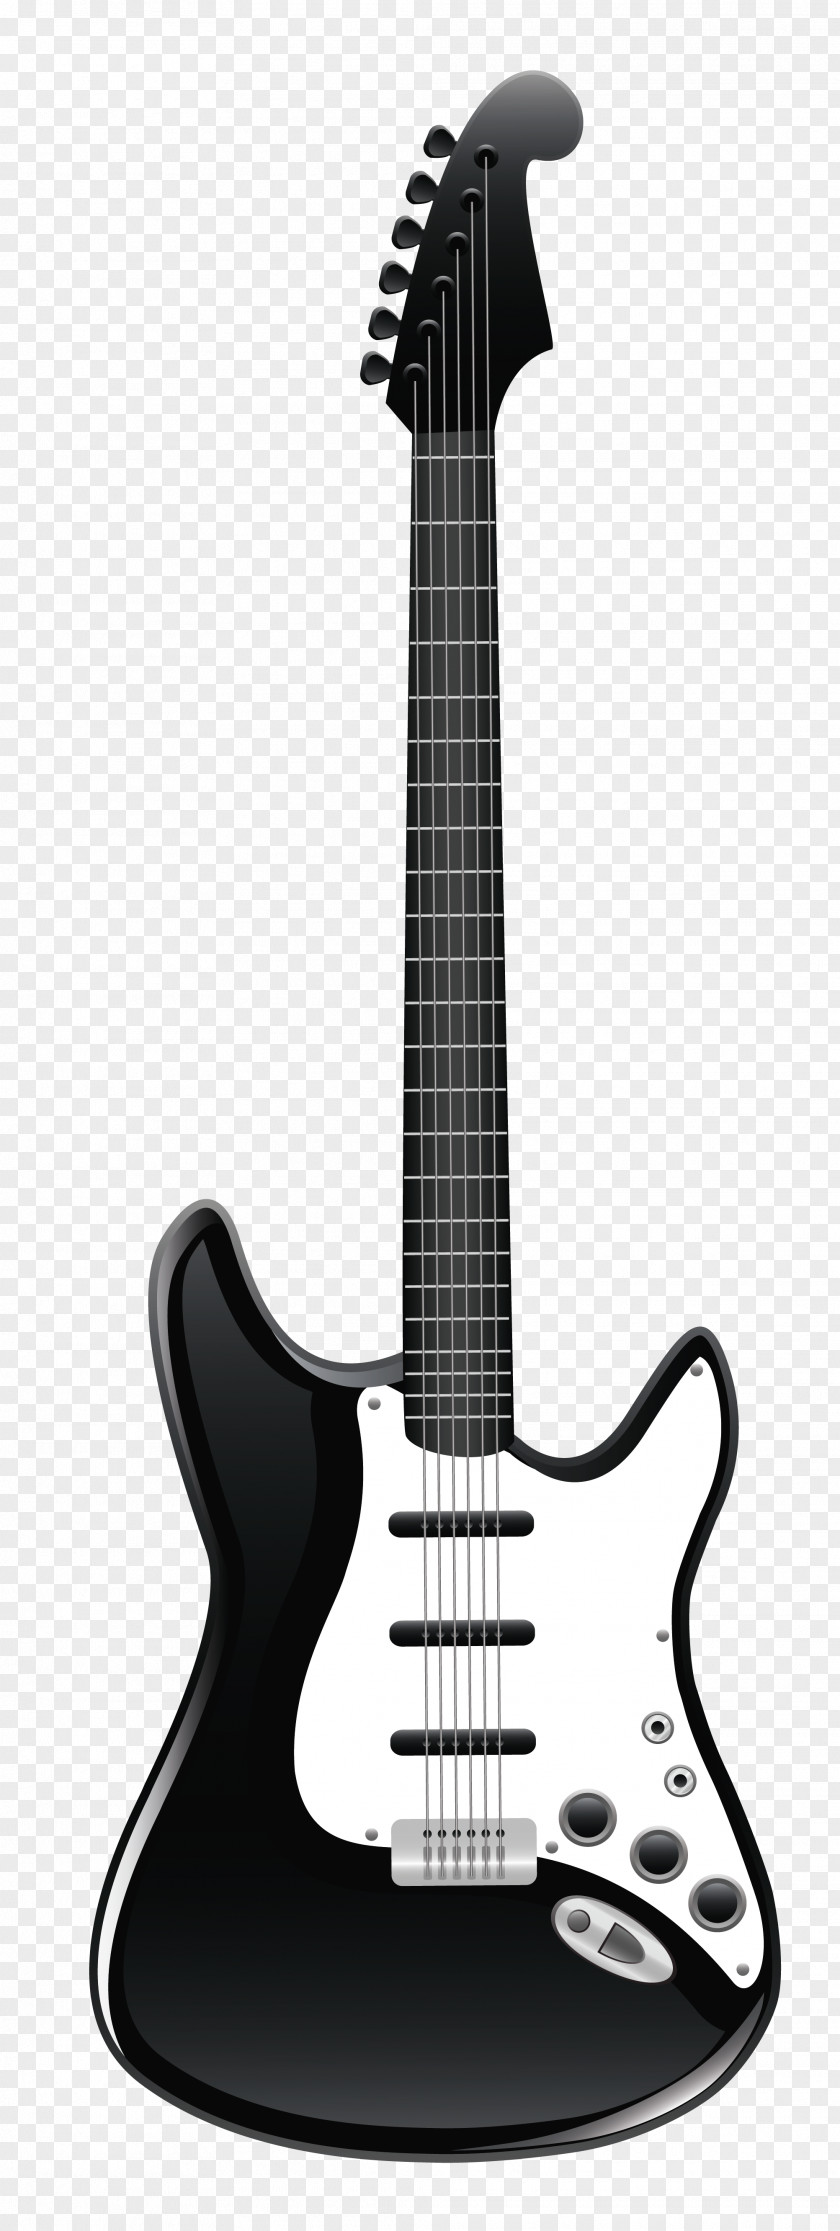 Black And White Guitar Clipart Clip Art PNG